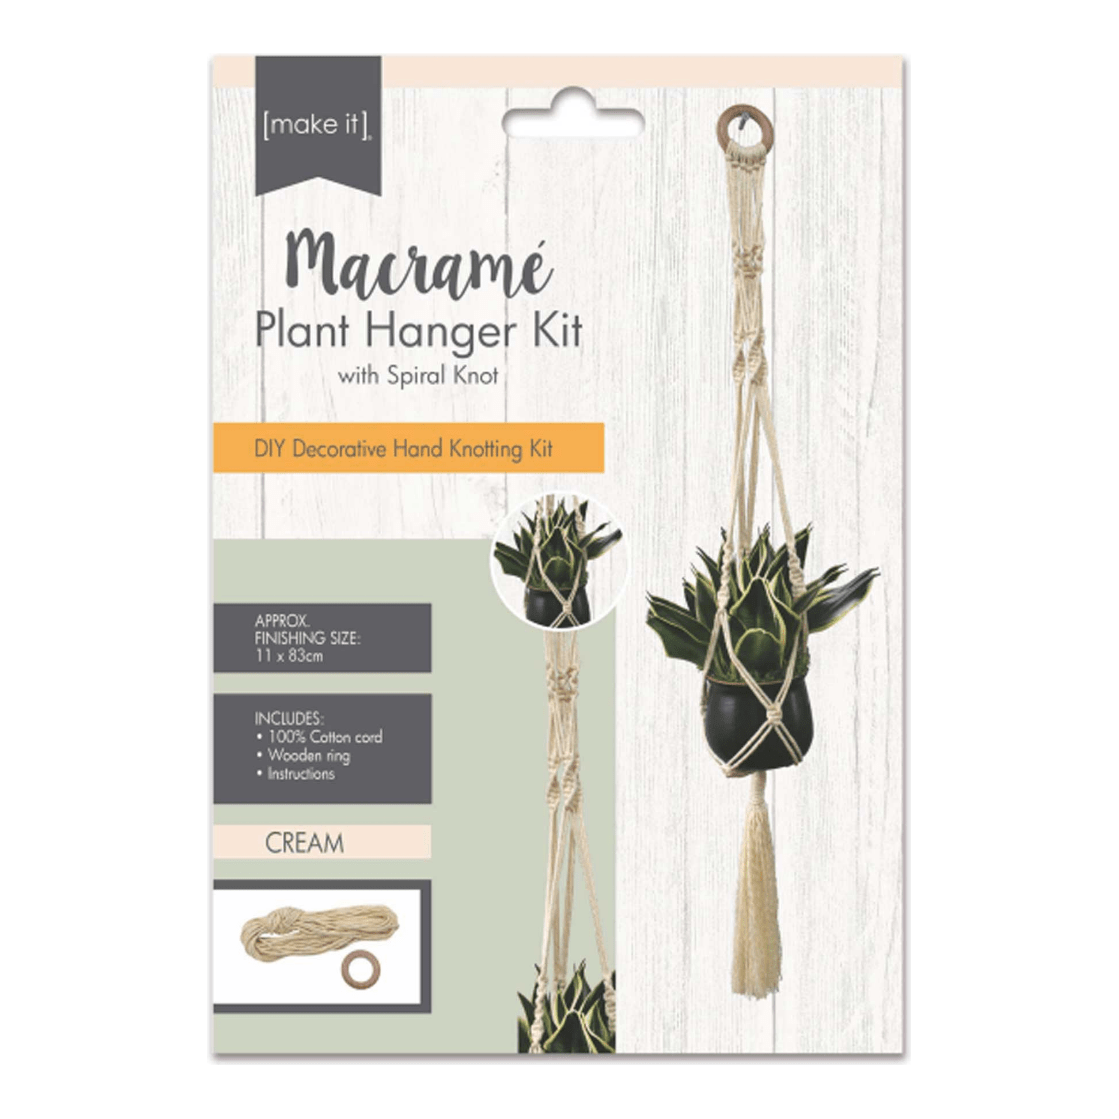 Macrame Plant Hanger Kit with Spiral Knot - Cream